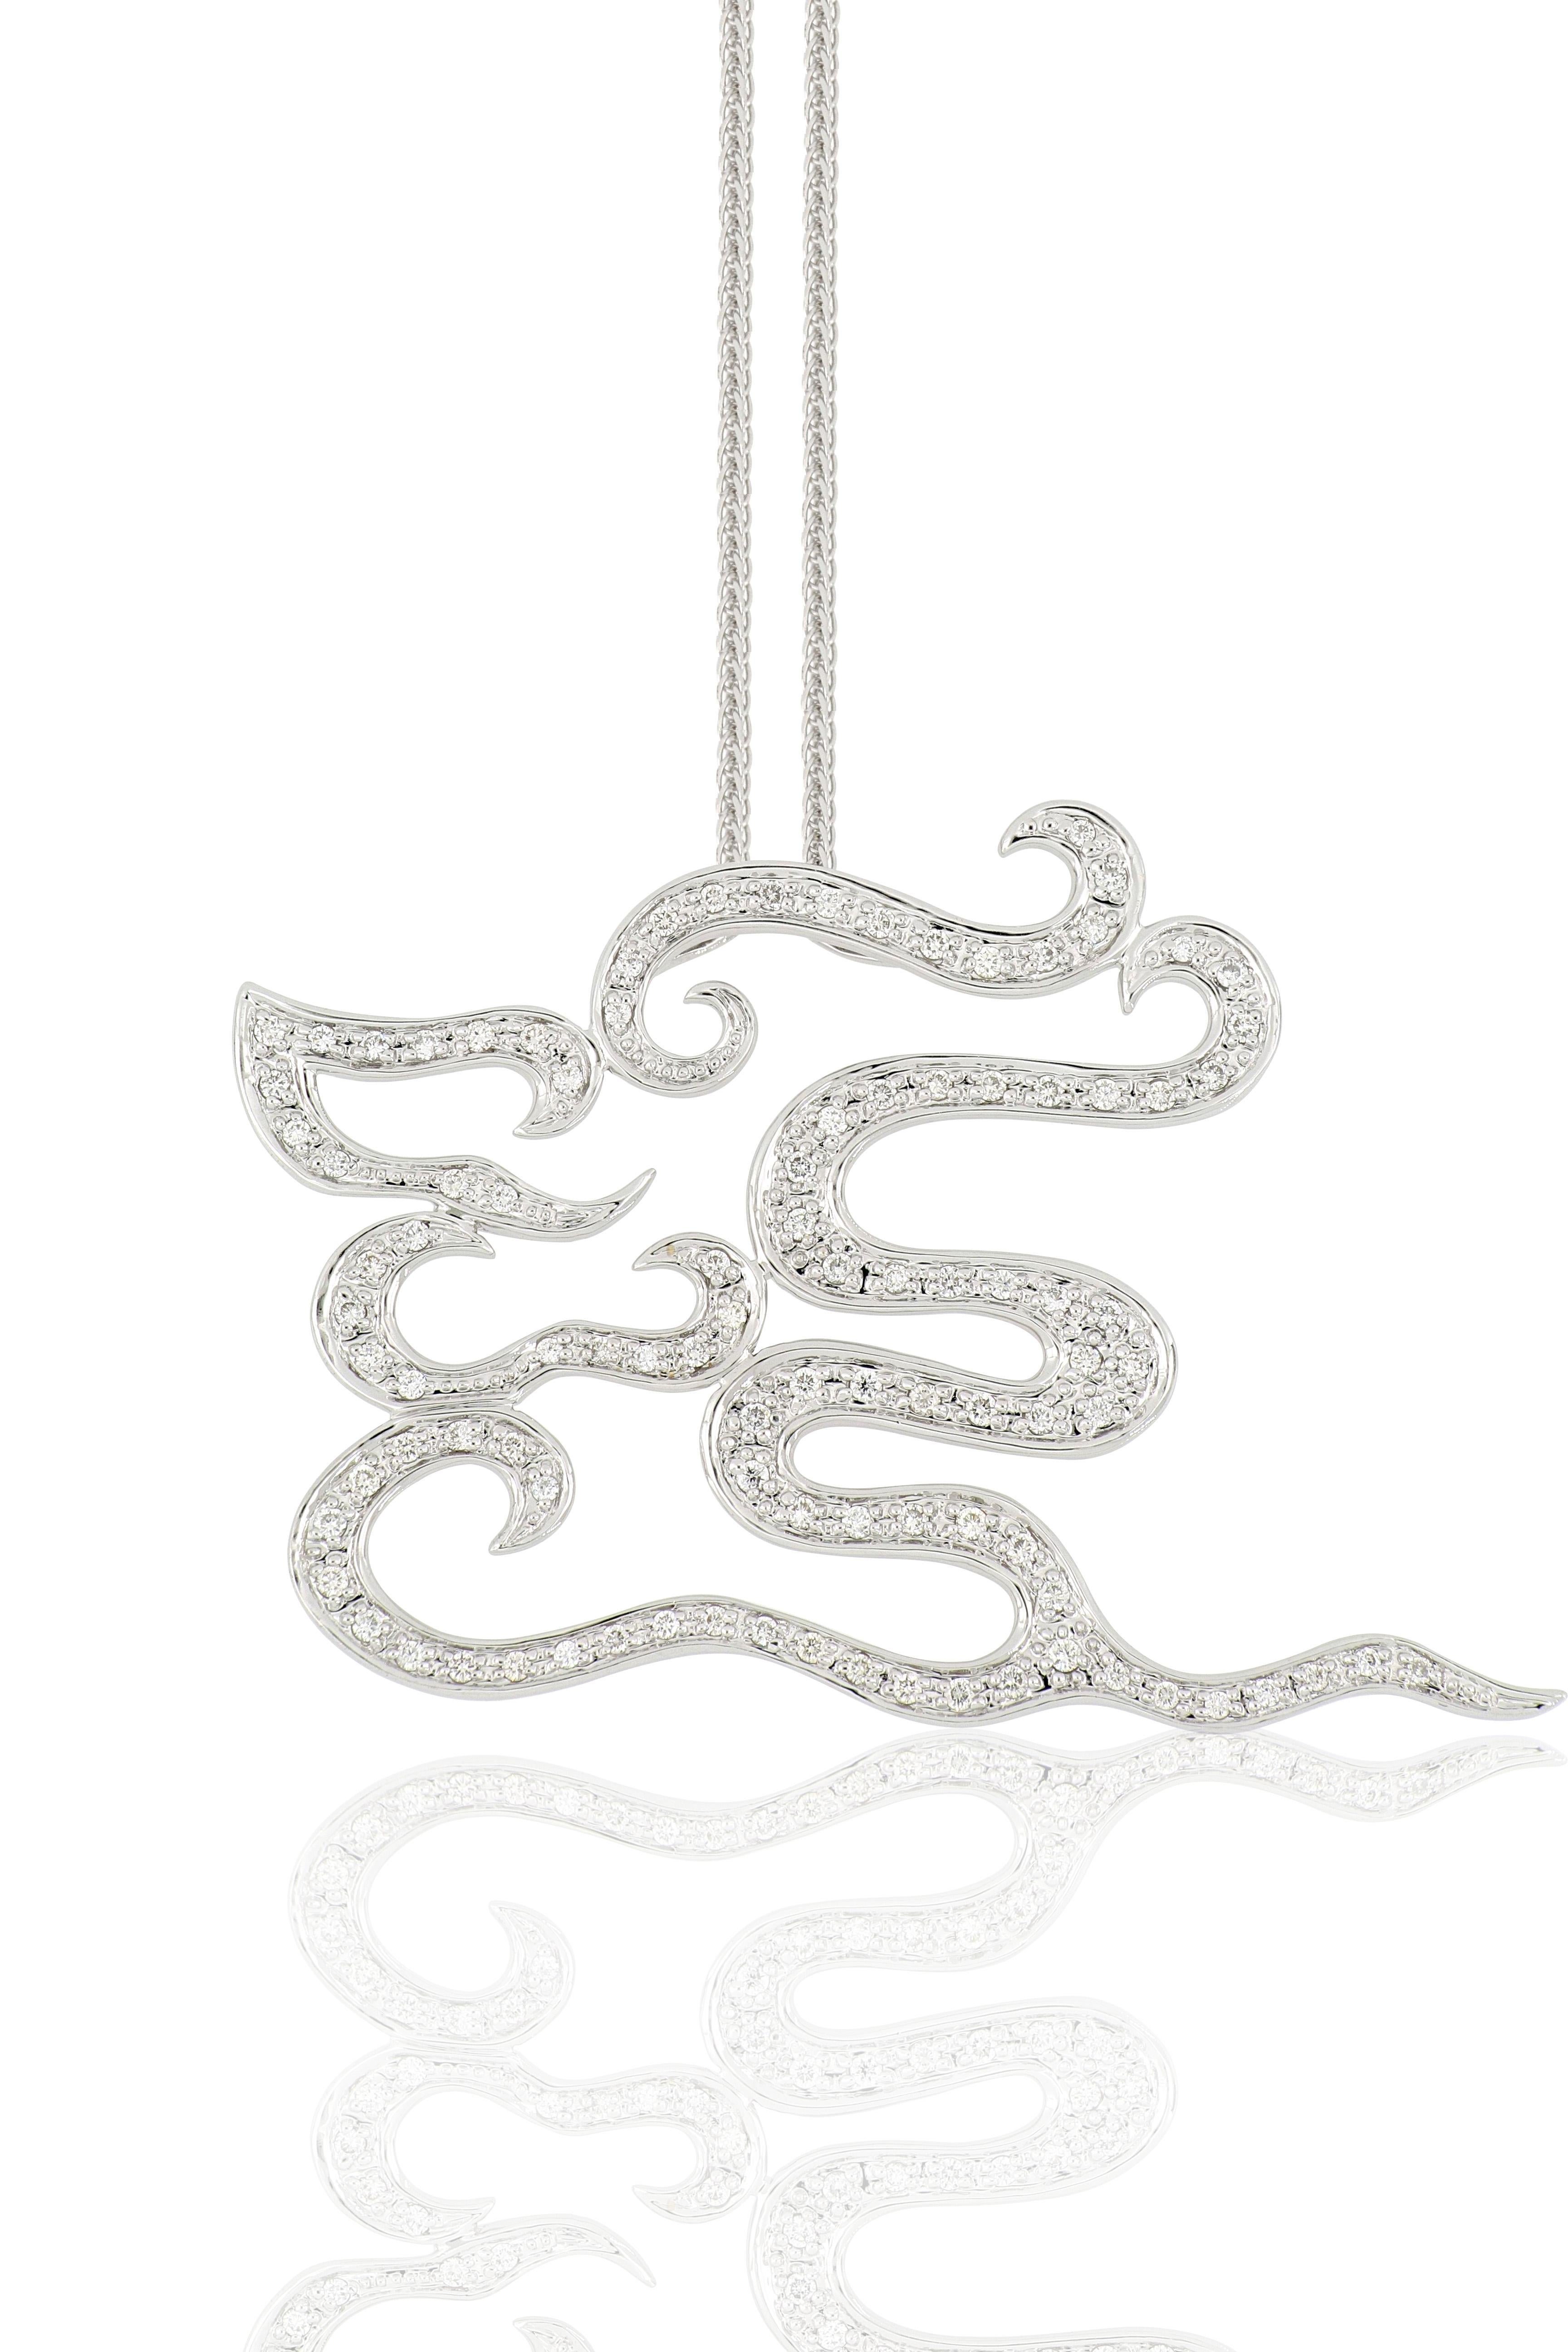  An ‘dragon-cloud’ pendant set with diamonds weighing 0.50 carats, mounted in 18 Karat white gold. 
Auspicious Cloud represents happy wishes, it has a symbolic meaning of ‘good luck’ and peace in Chinese culture. This pendant of auspicious cloud